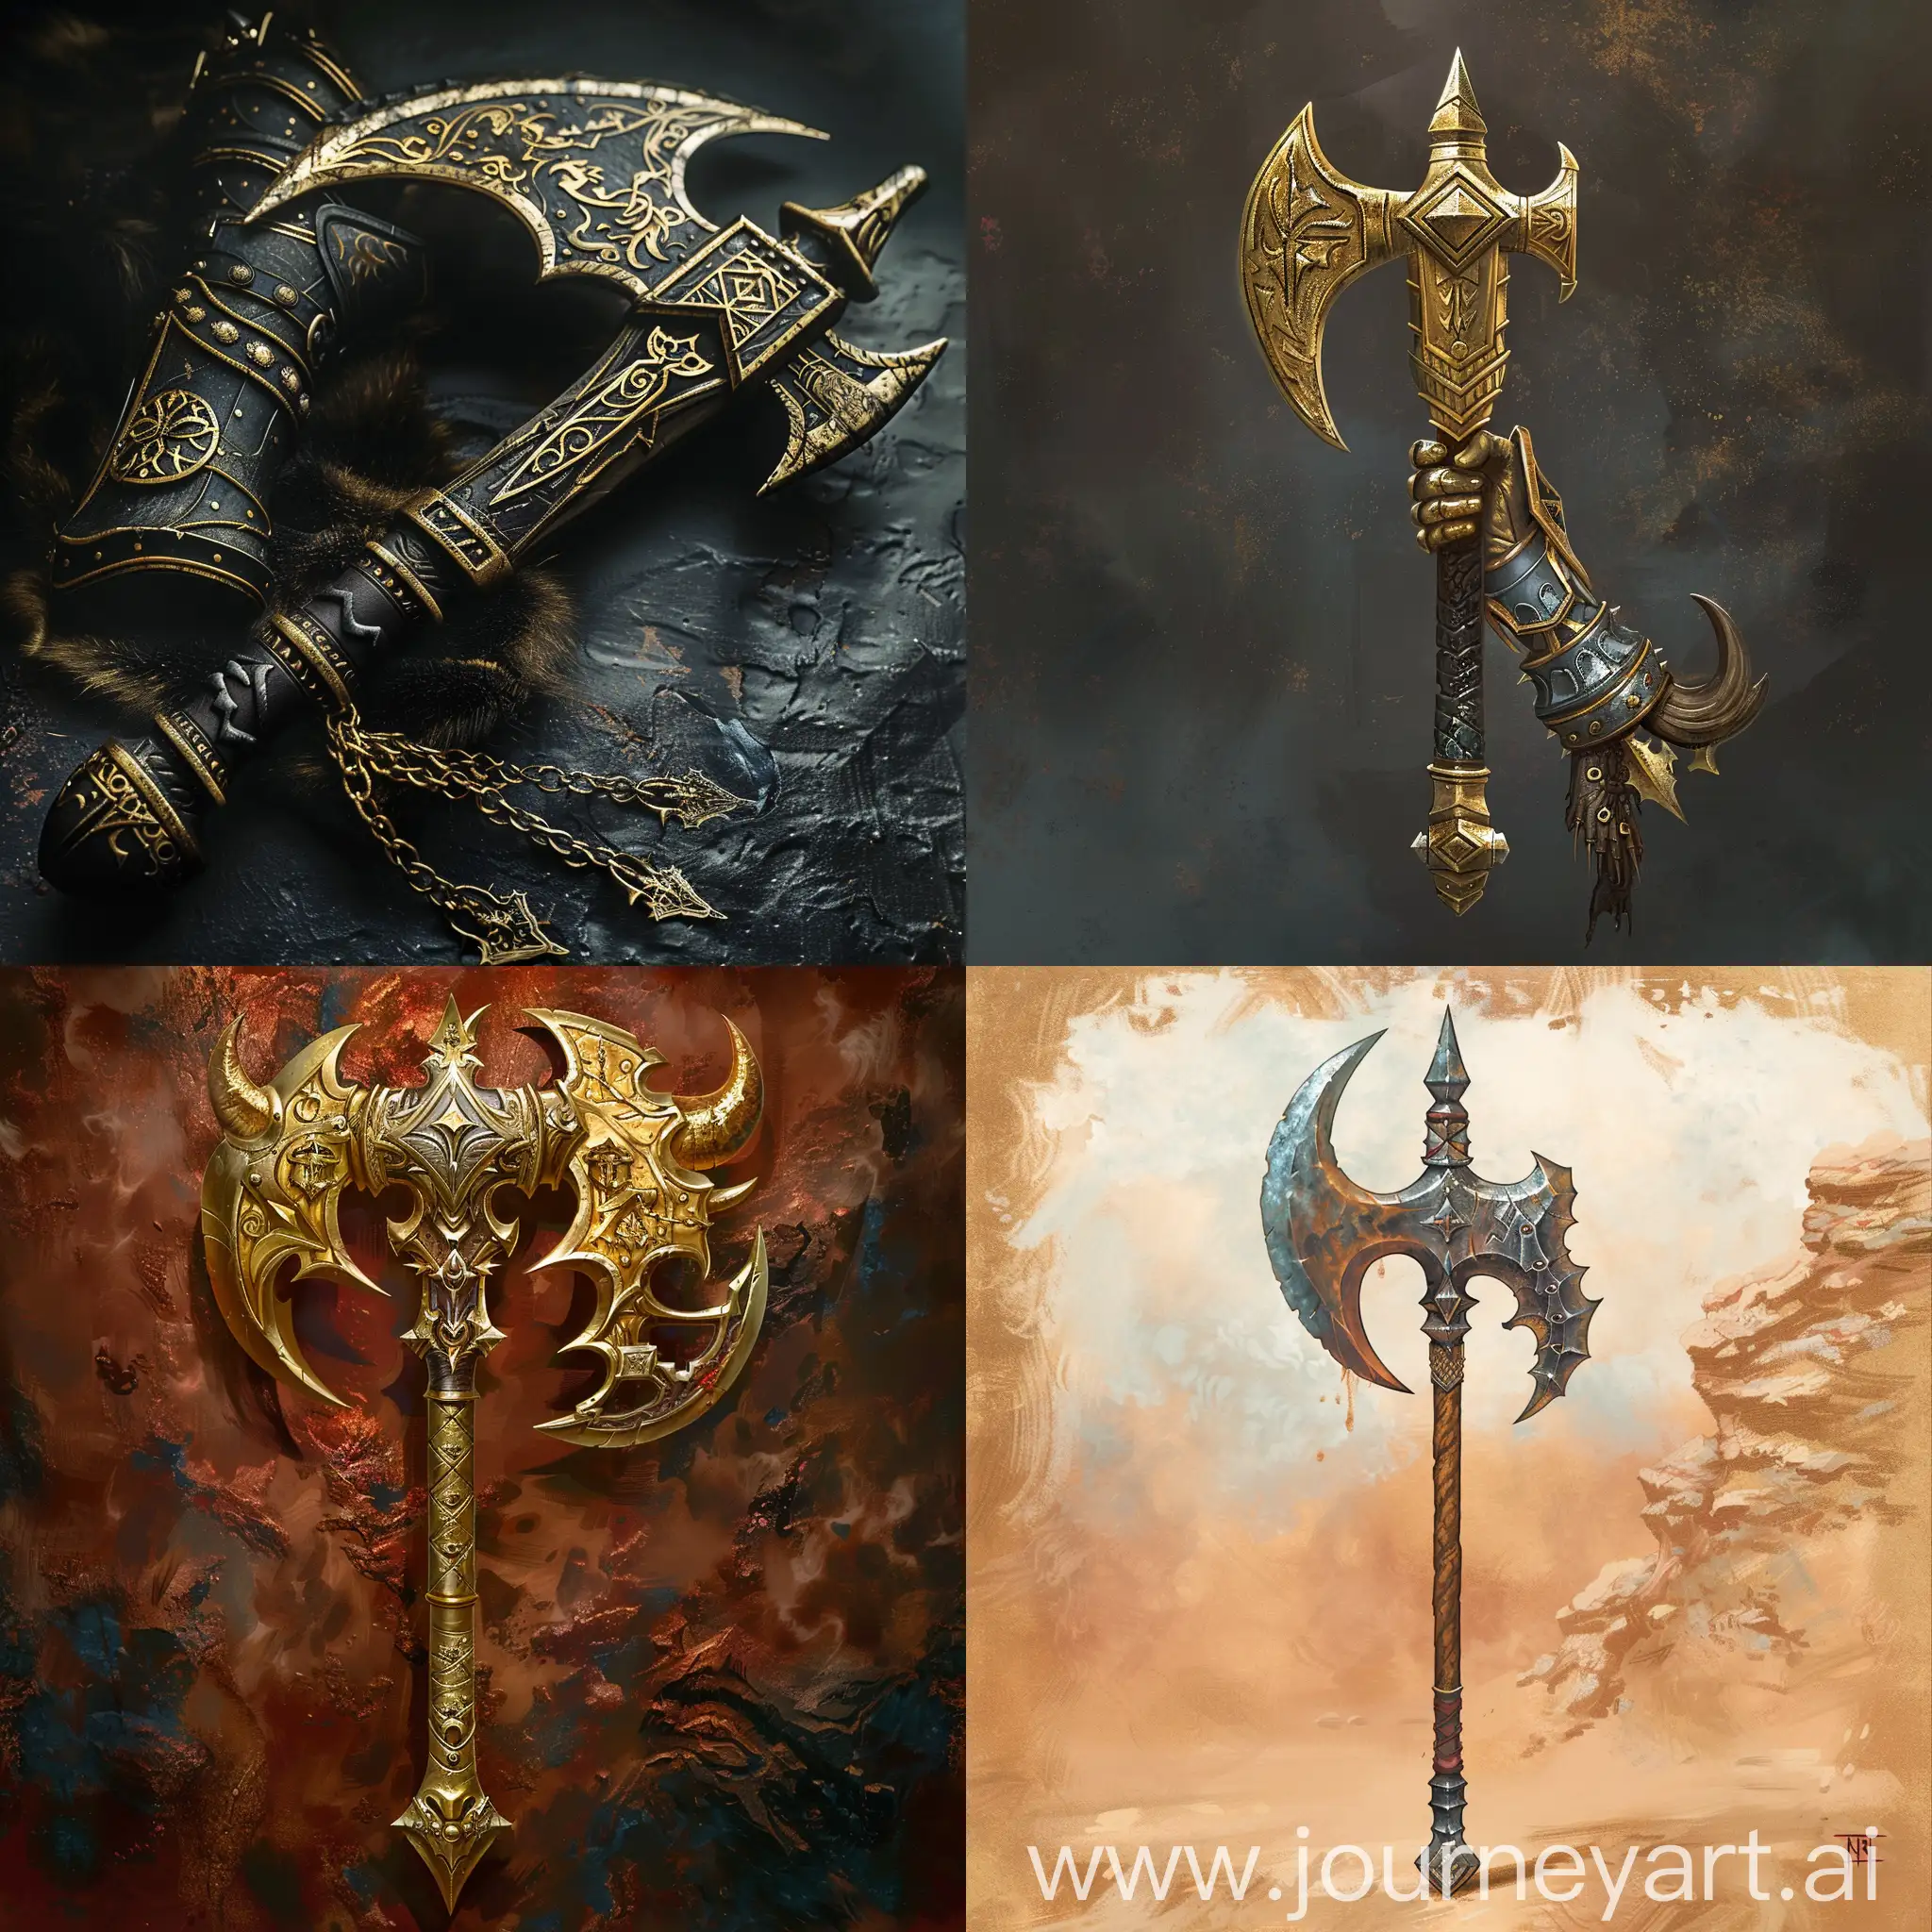 merge the gauntlet of torm with the horned battle axe of Kiri-Jolith to create a holy sigil for a lawful good paladin 